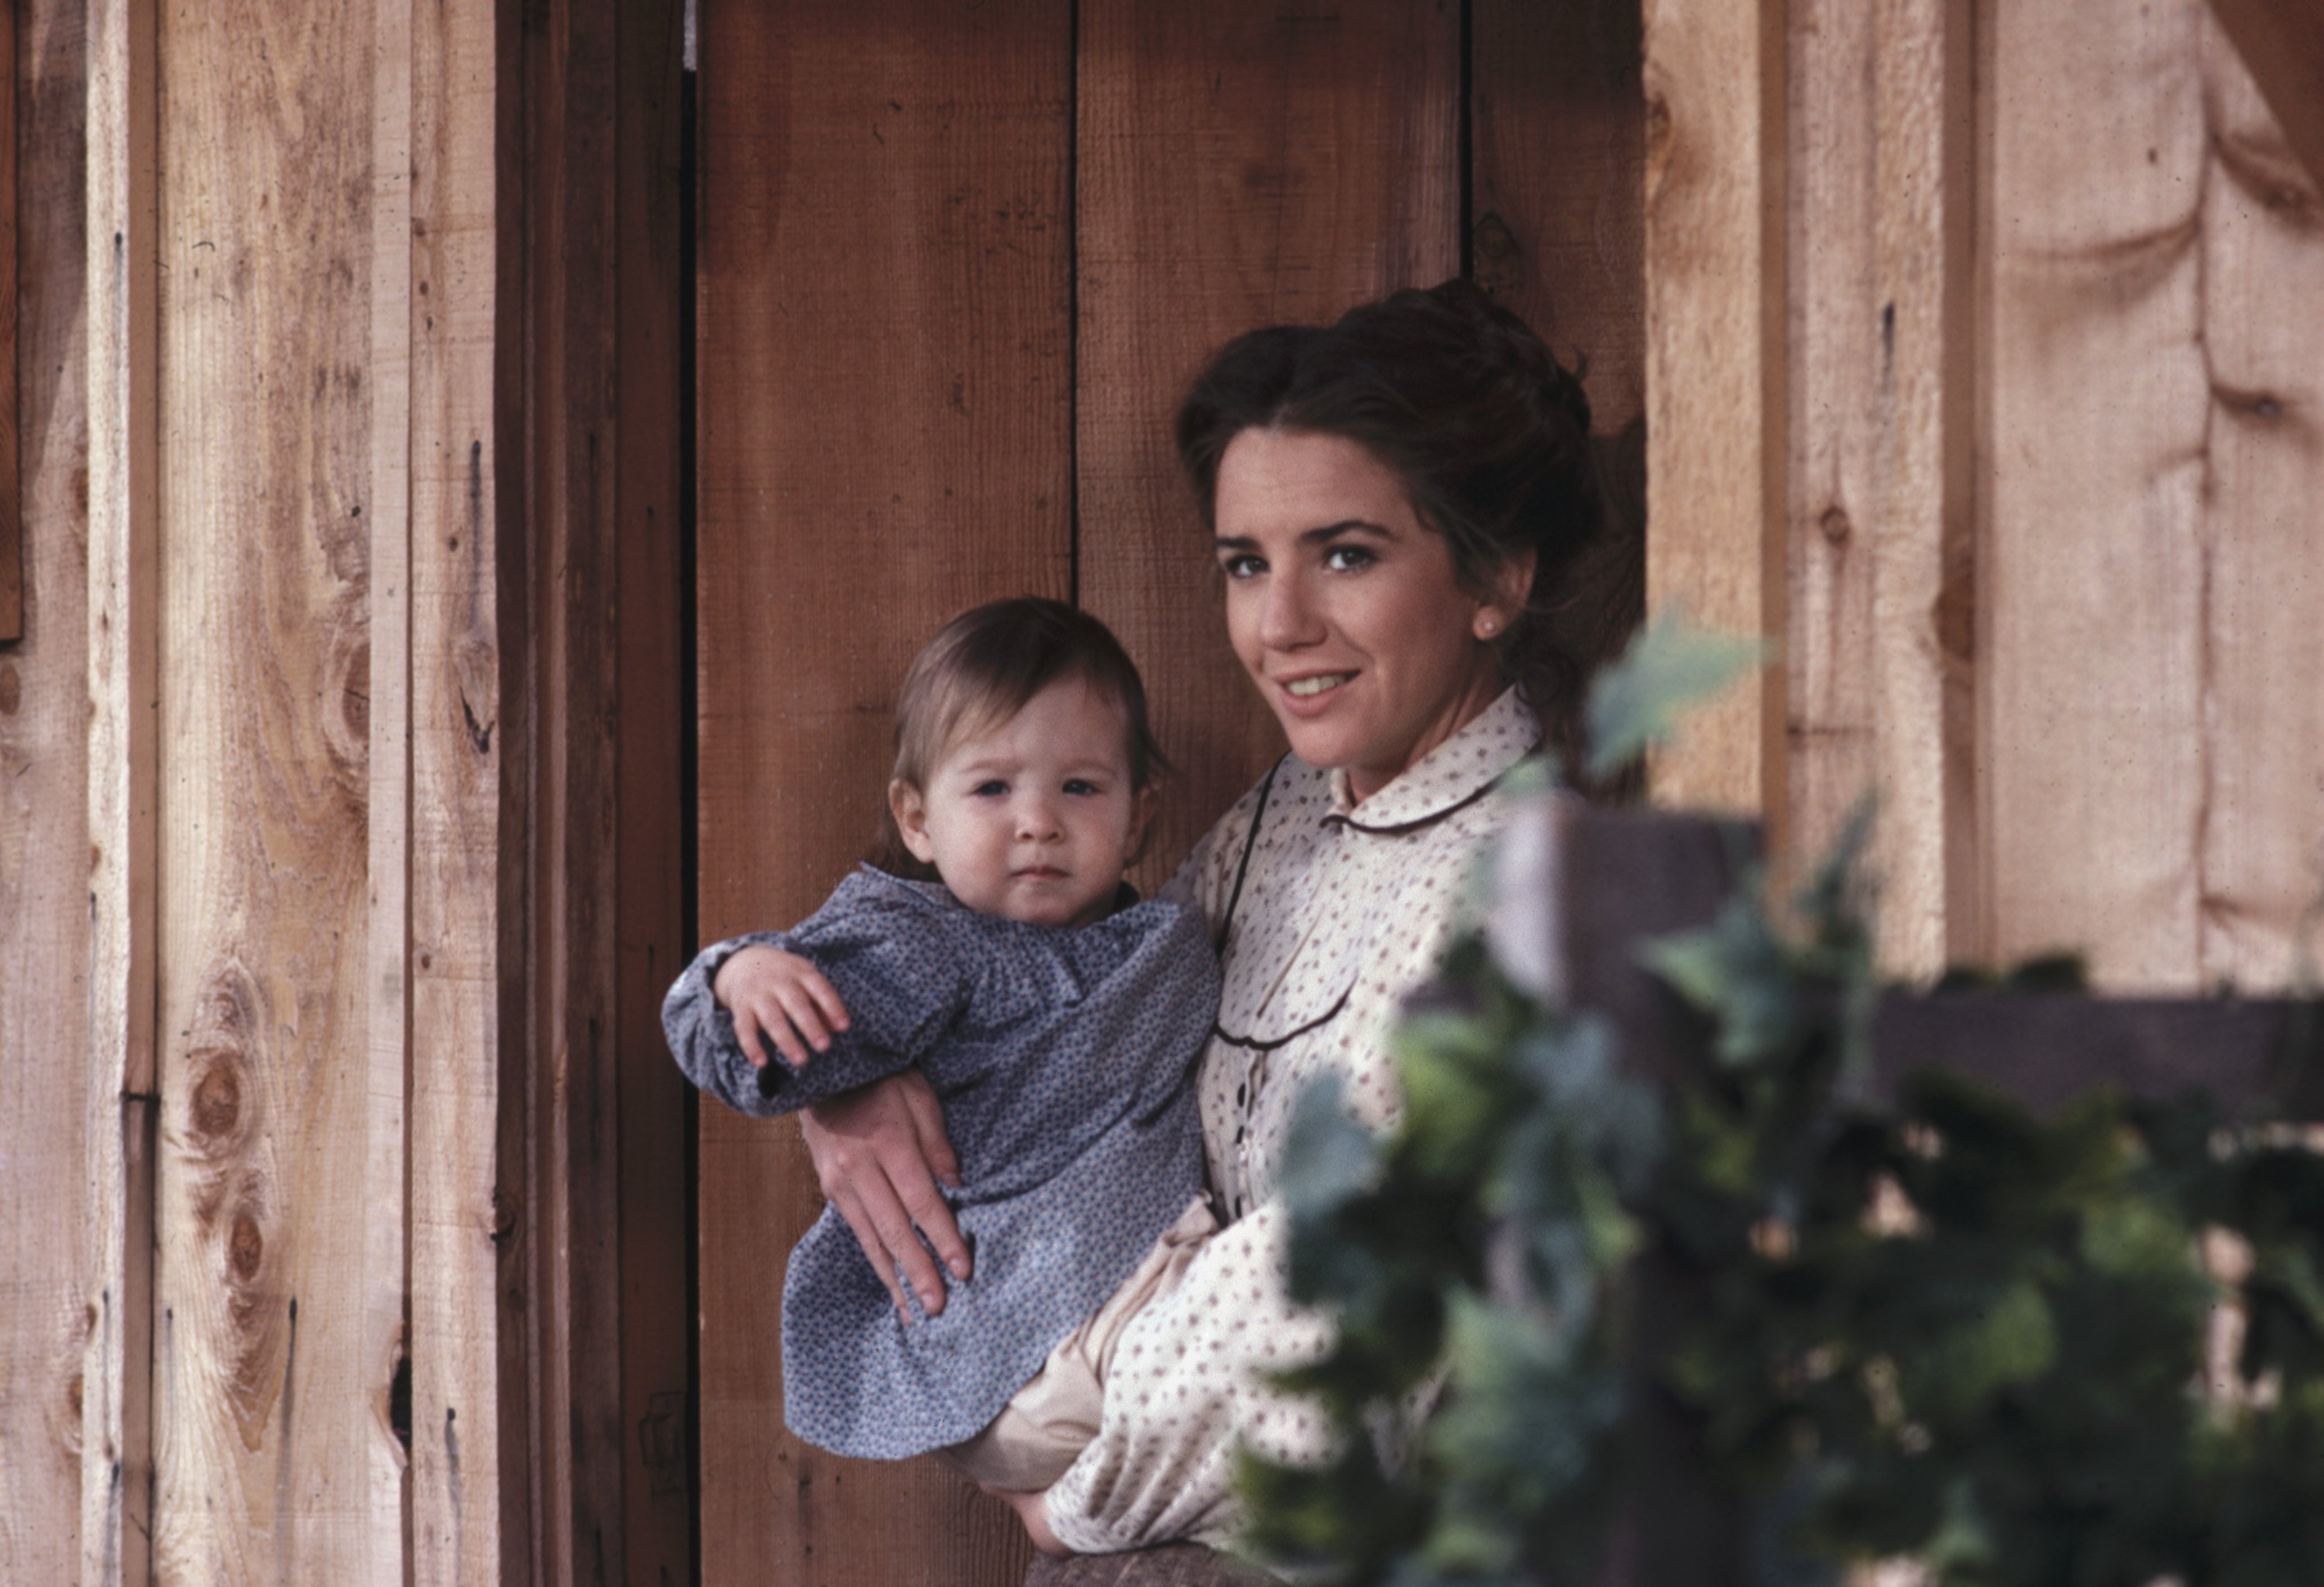 Melissa Gilbert as Laura Ingalls Wilder, holding her baby, on the set of 'Little House on the Prairie.'